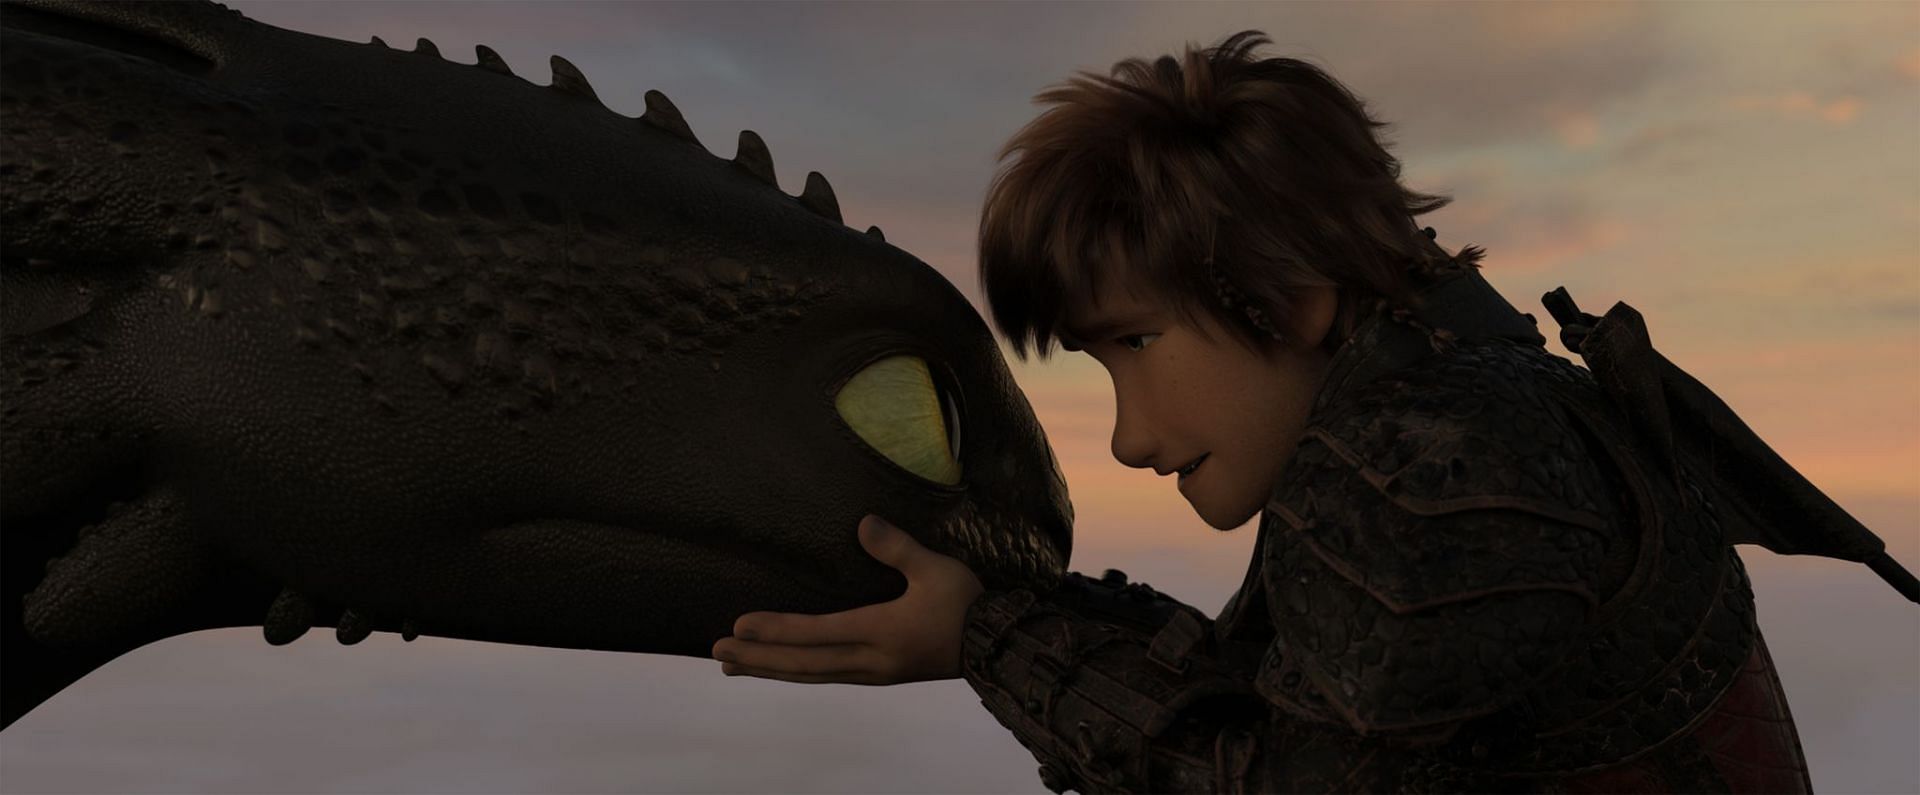 The upcoming How to Train Your Dragon live-action film is going to release in 2025 (Image via Dreamworks)